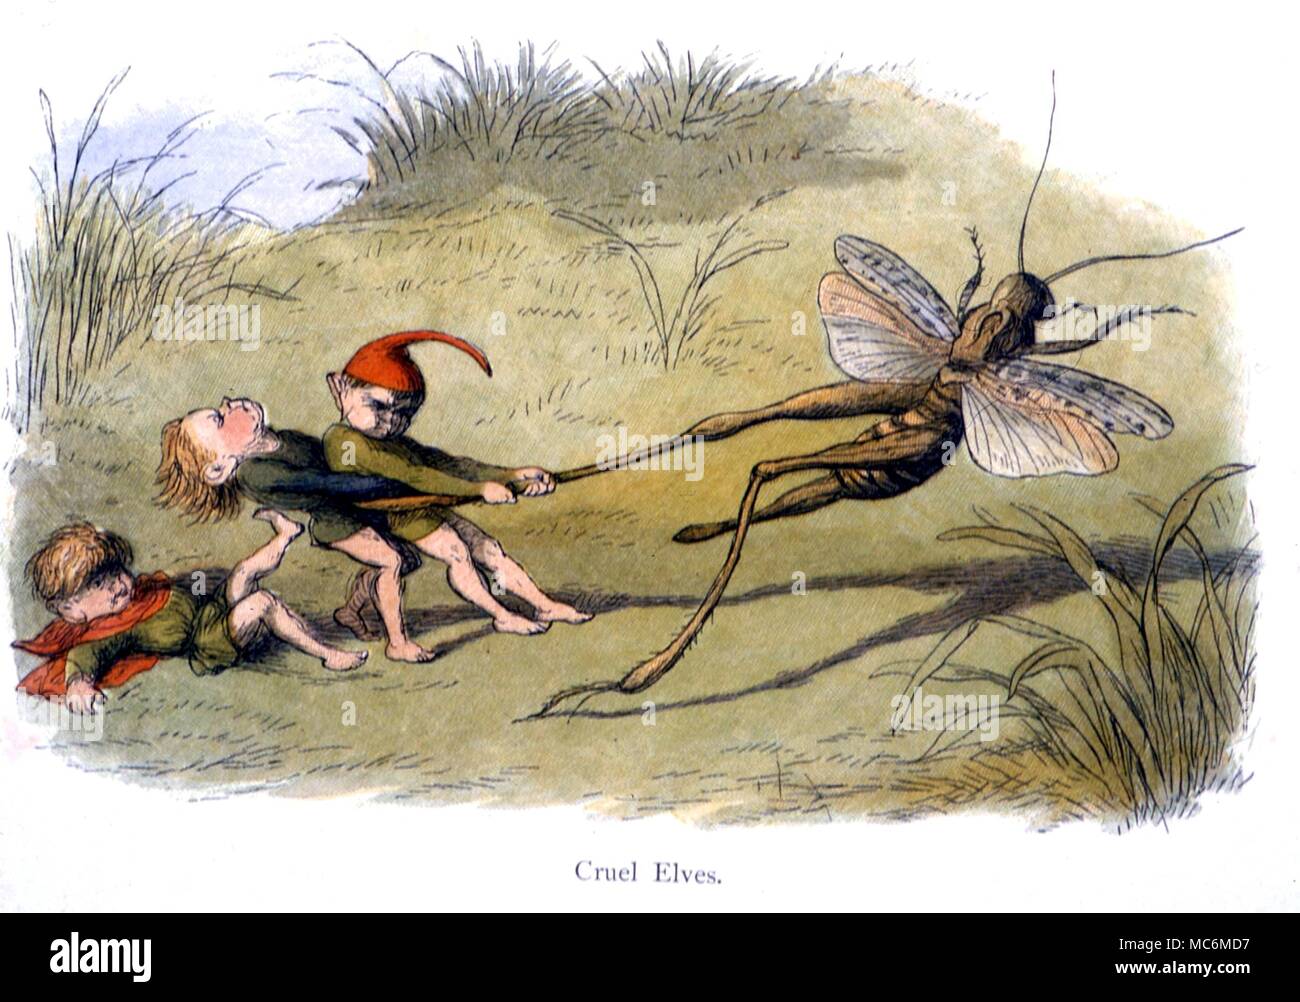 FAIRY TALES - Cruel Elves. From Richard Doyle's In Fairyland. A Series of Pictures from the Elf-World, 1875 Stock Photo